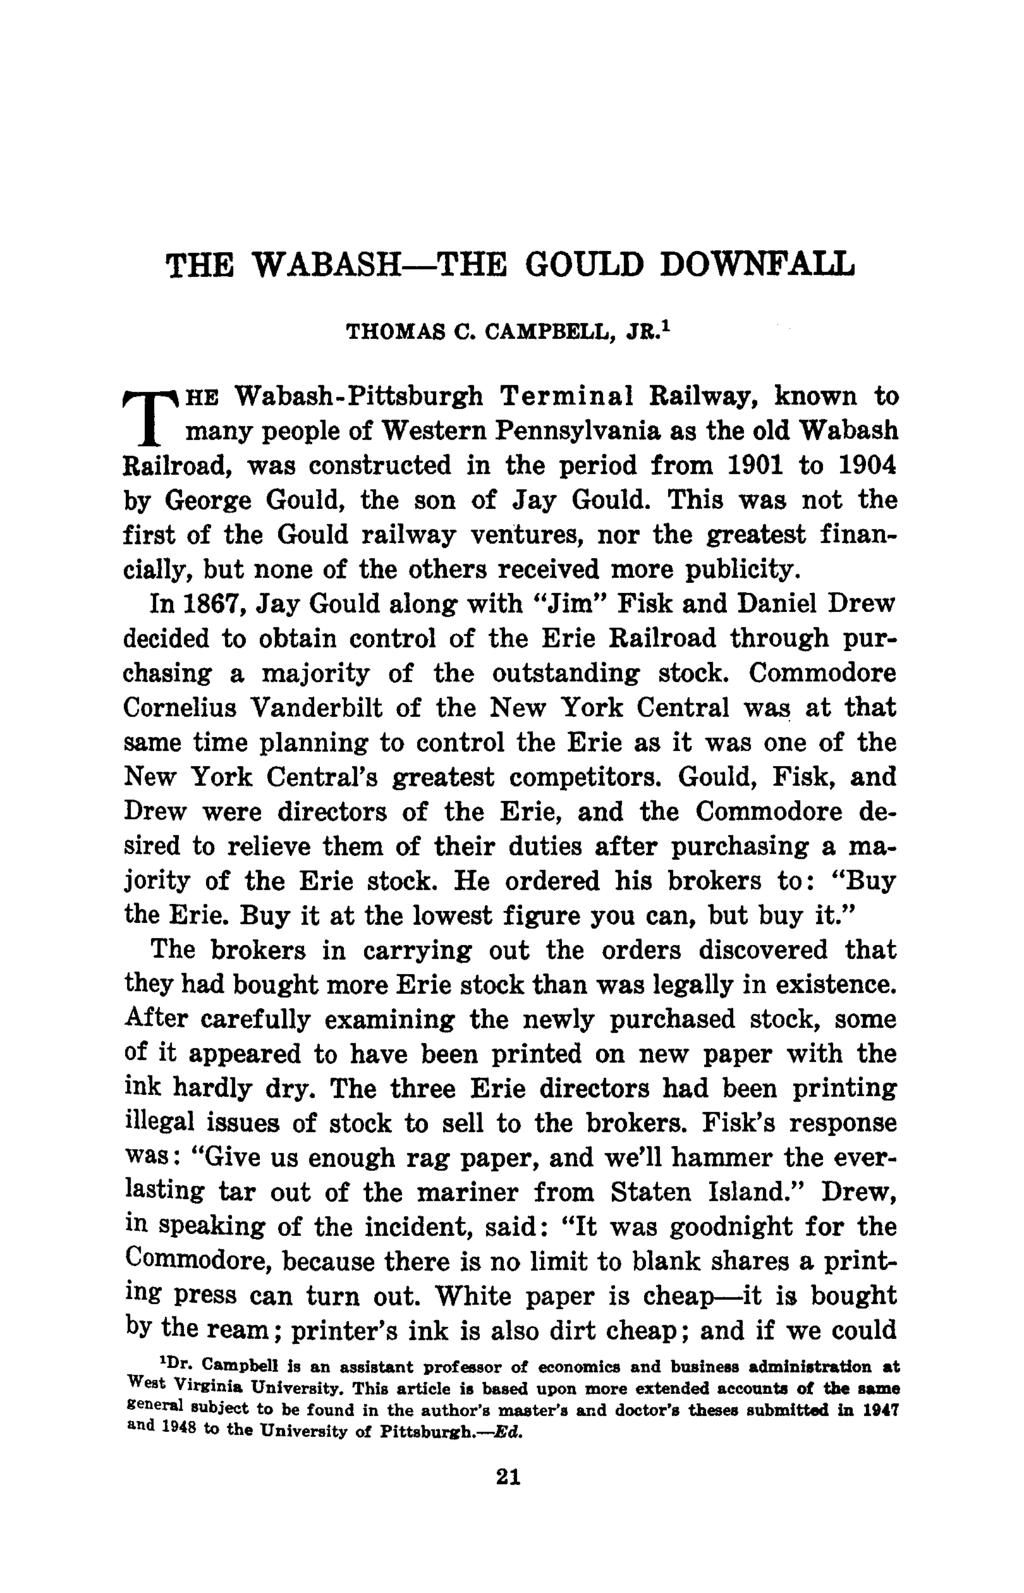 THE WABASH THE GOULD DOWNFALL THE THOMAS C. CAMPBELL, JR.